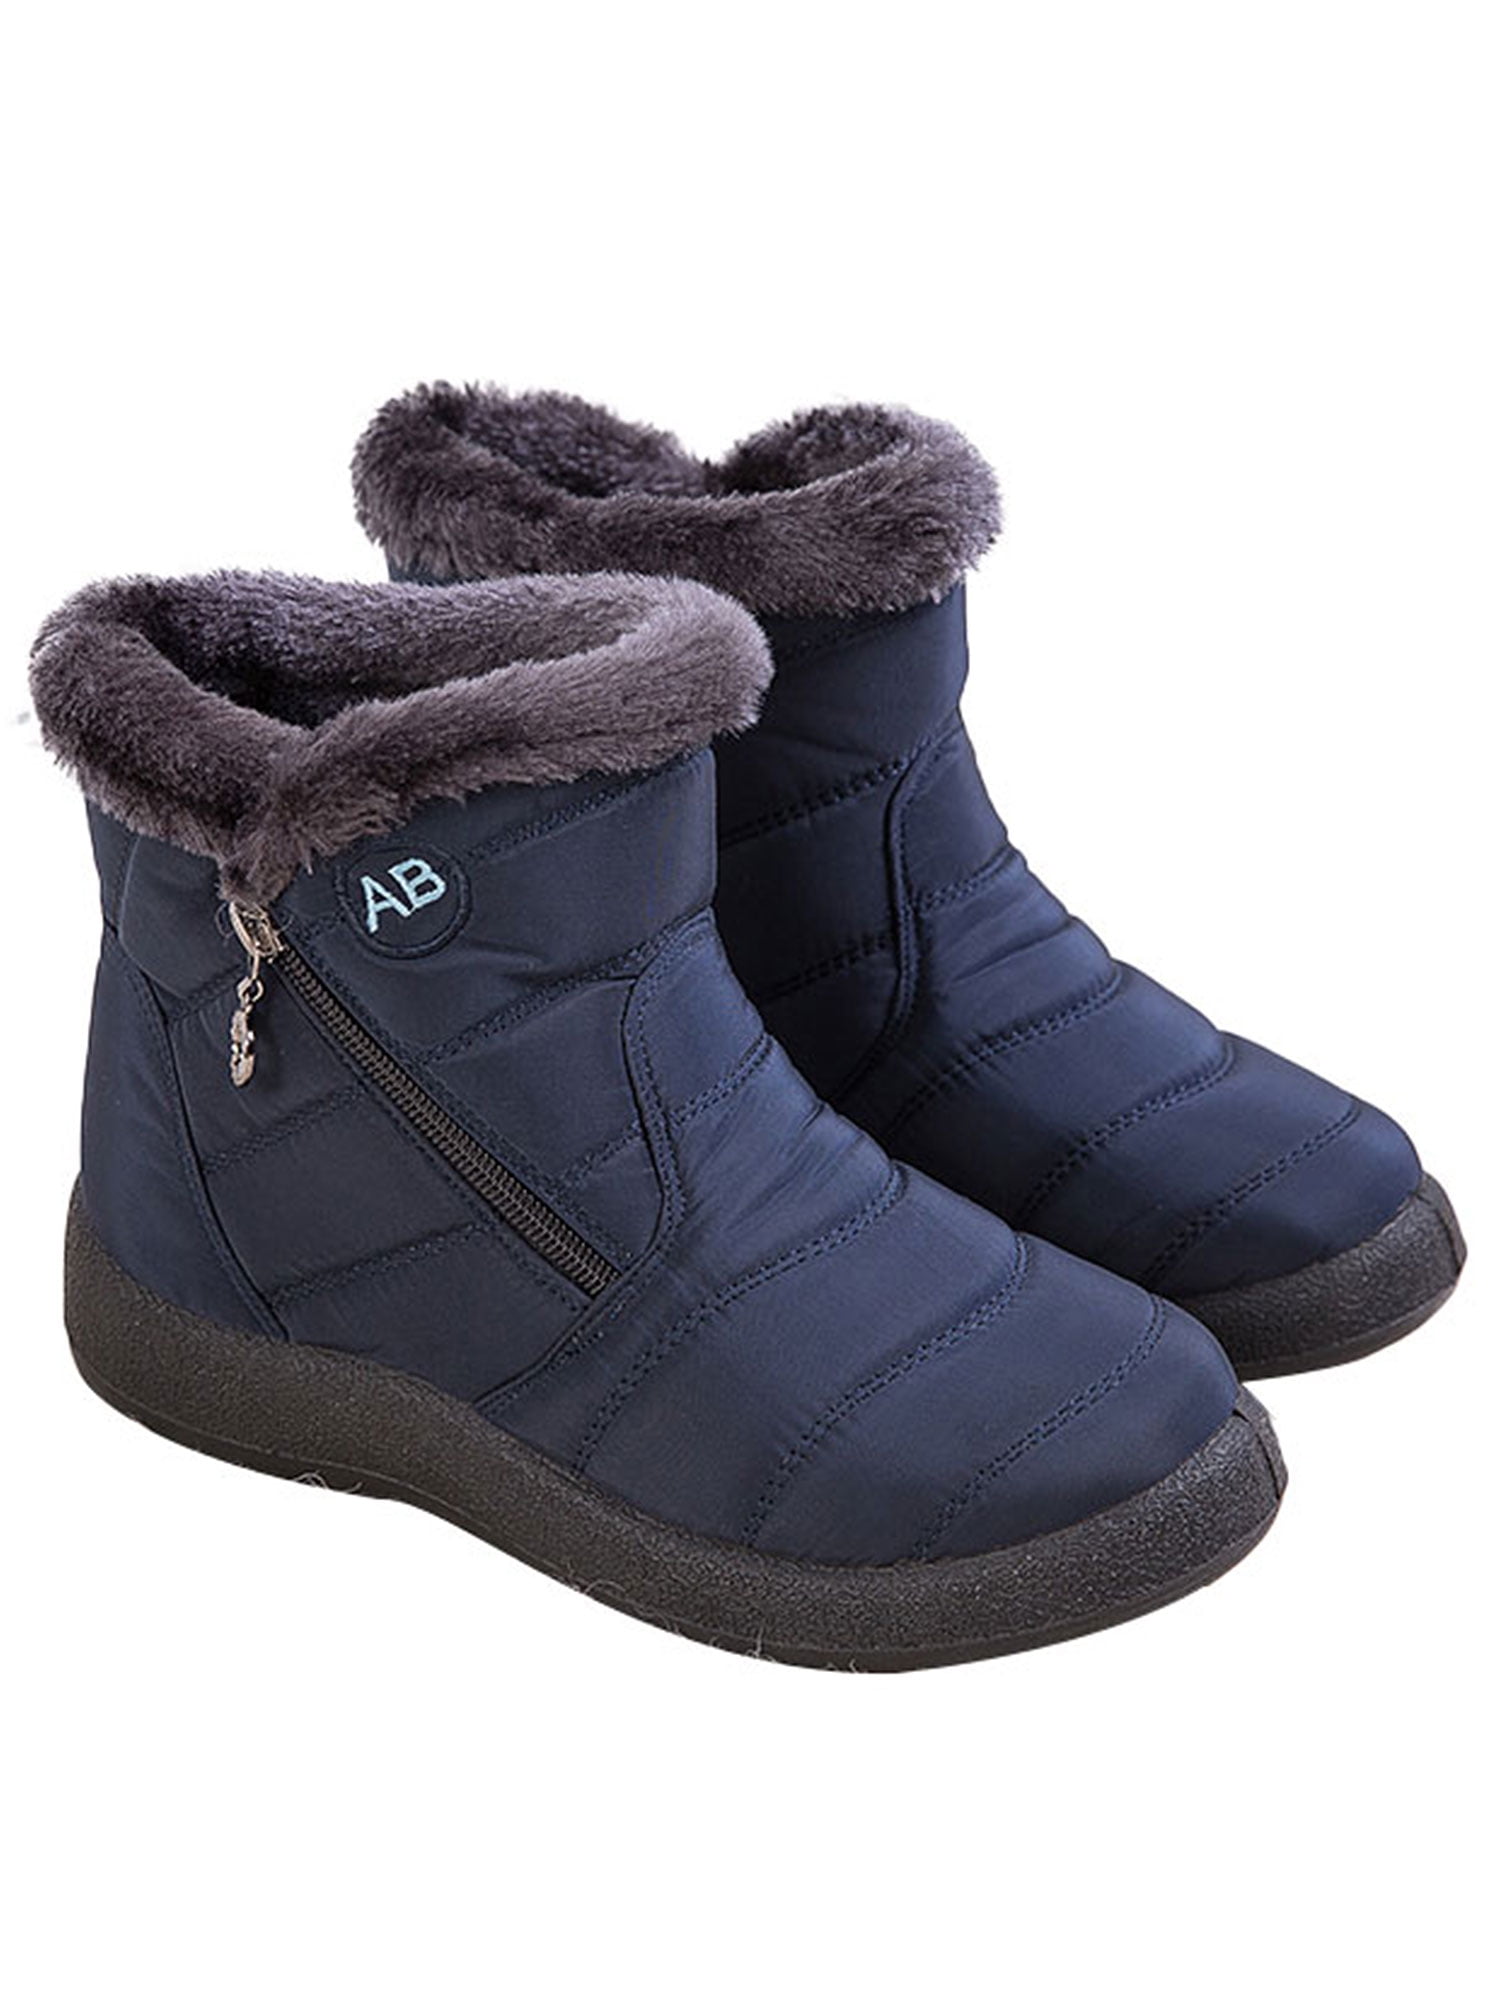 Women Waterproof Winter Shoes Snow Boots Plush-lined Warm Ankle Boot HOT 